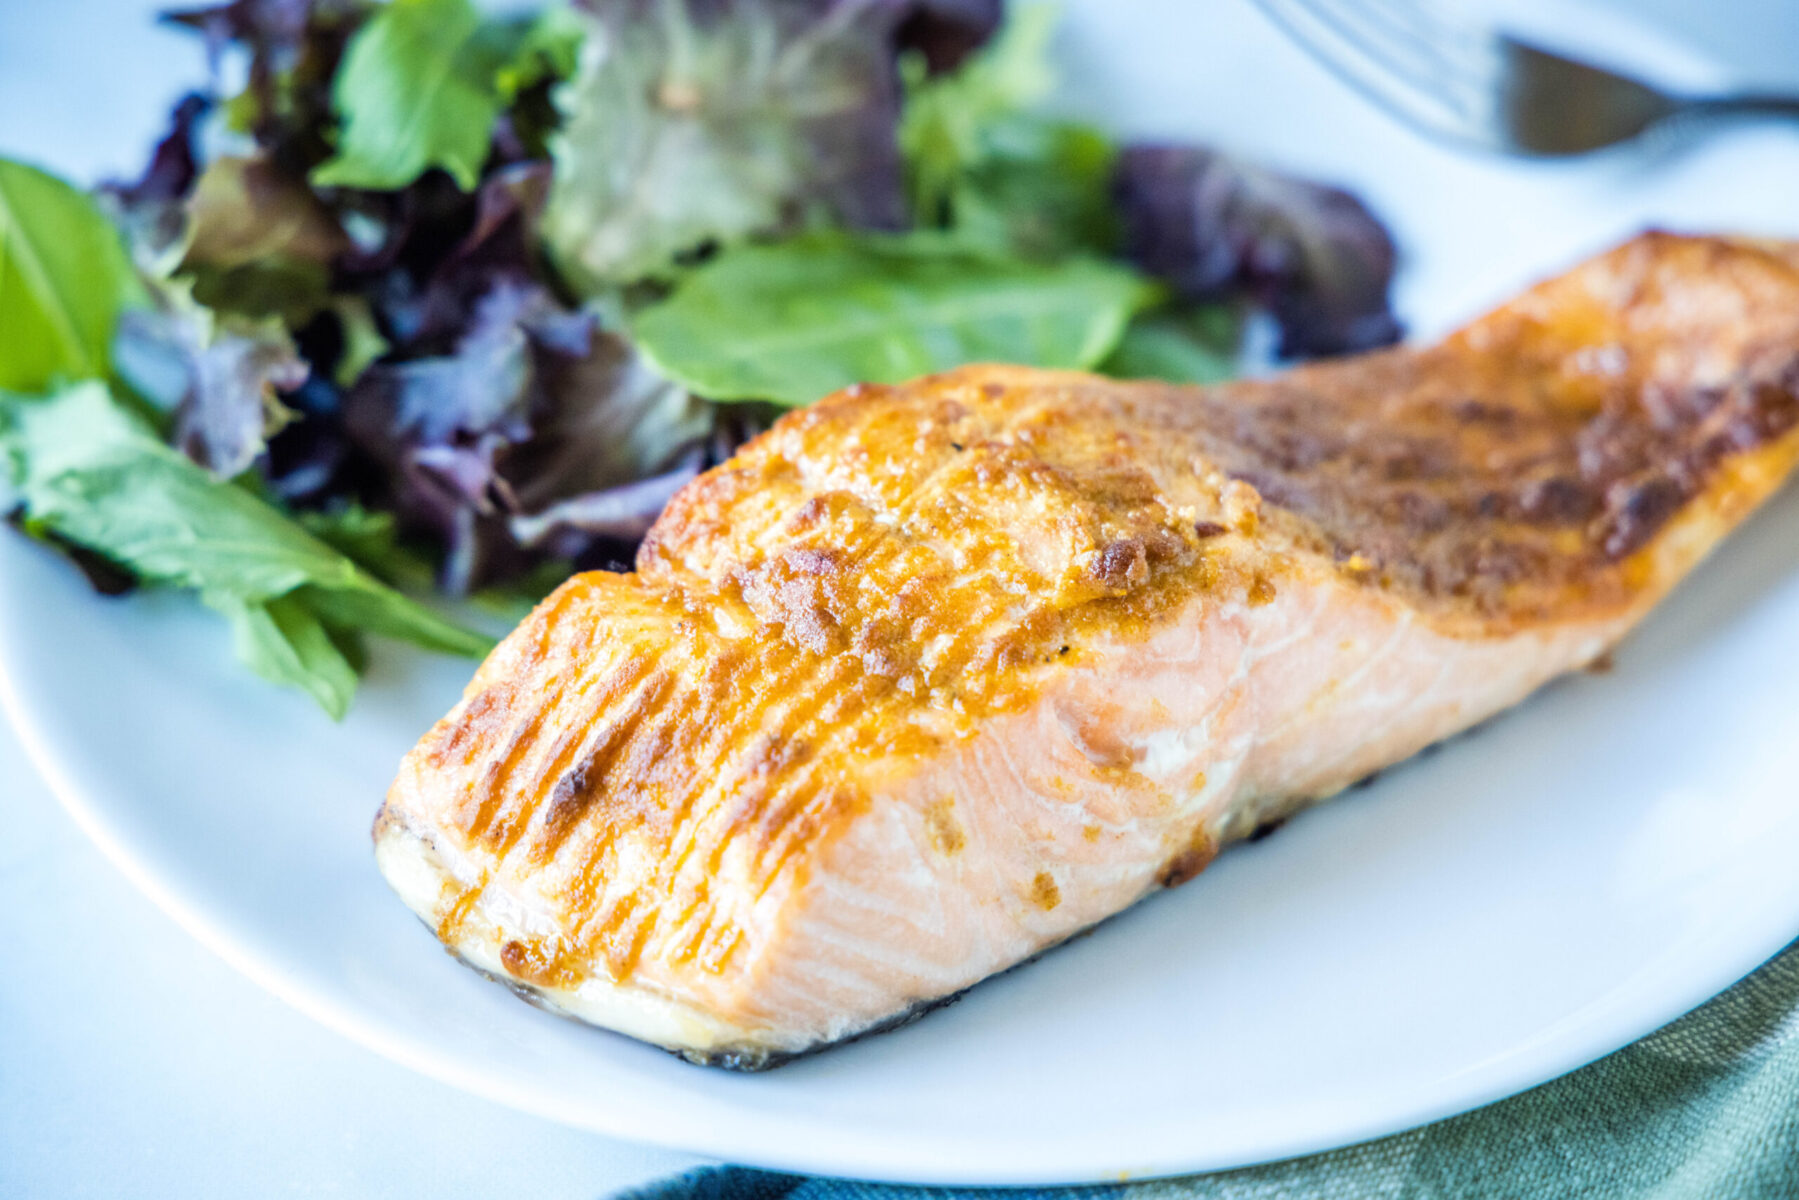 A salmon fillet on a plate with a salad.